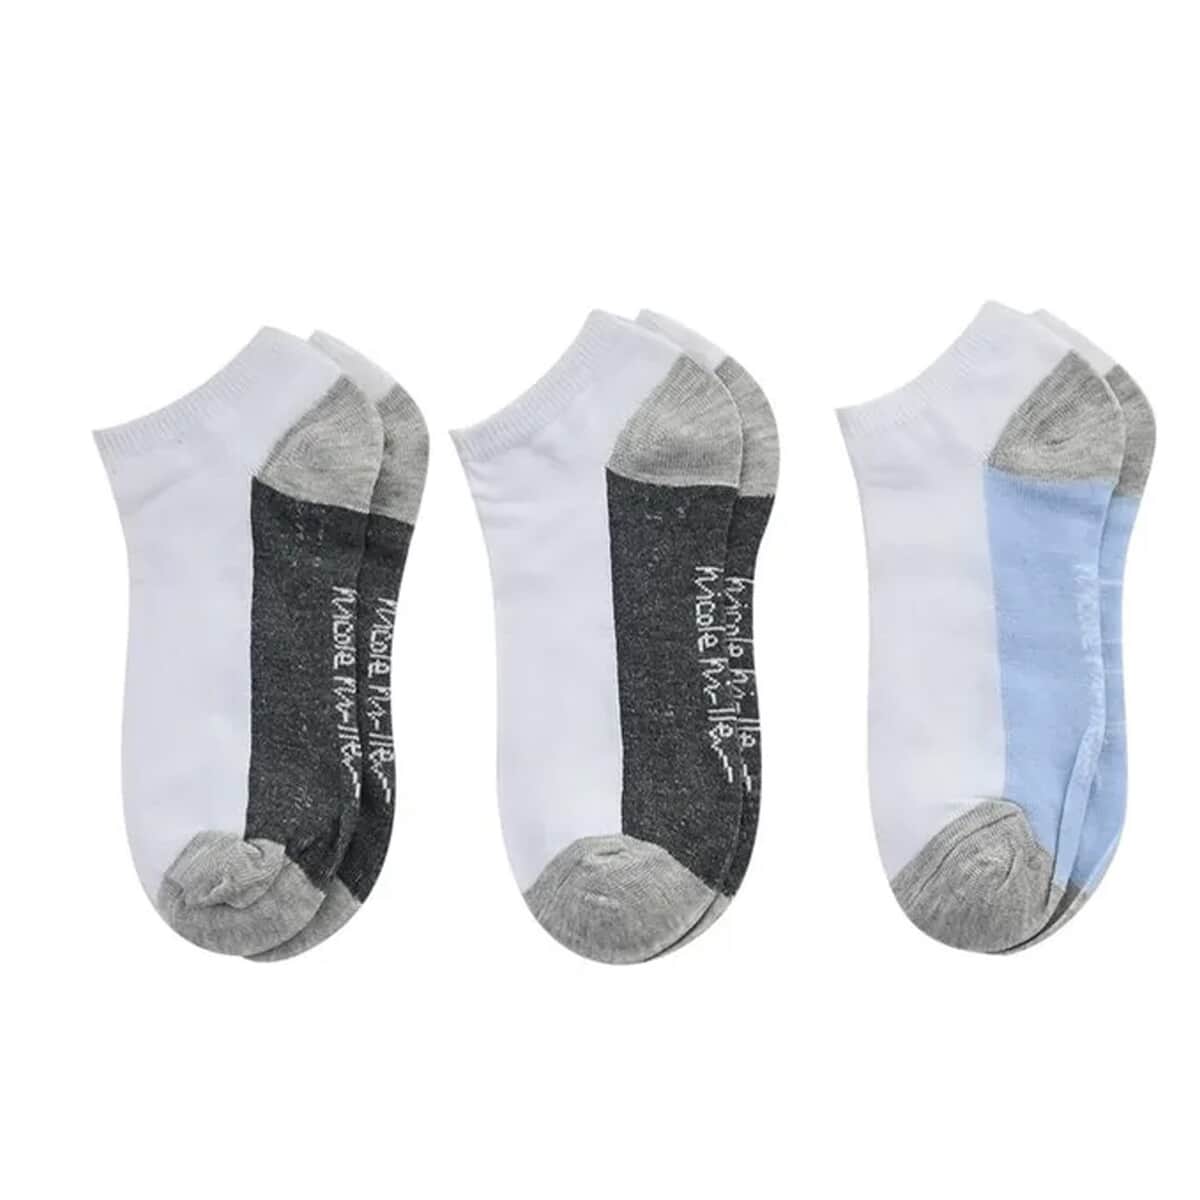 Nicole Miller 10 Pairs No Show Socks (Sizes 4-10) - White/Gray image number 4